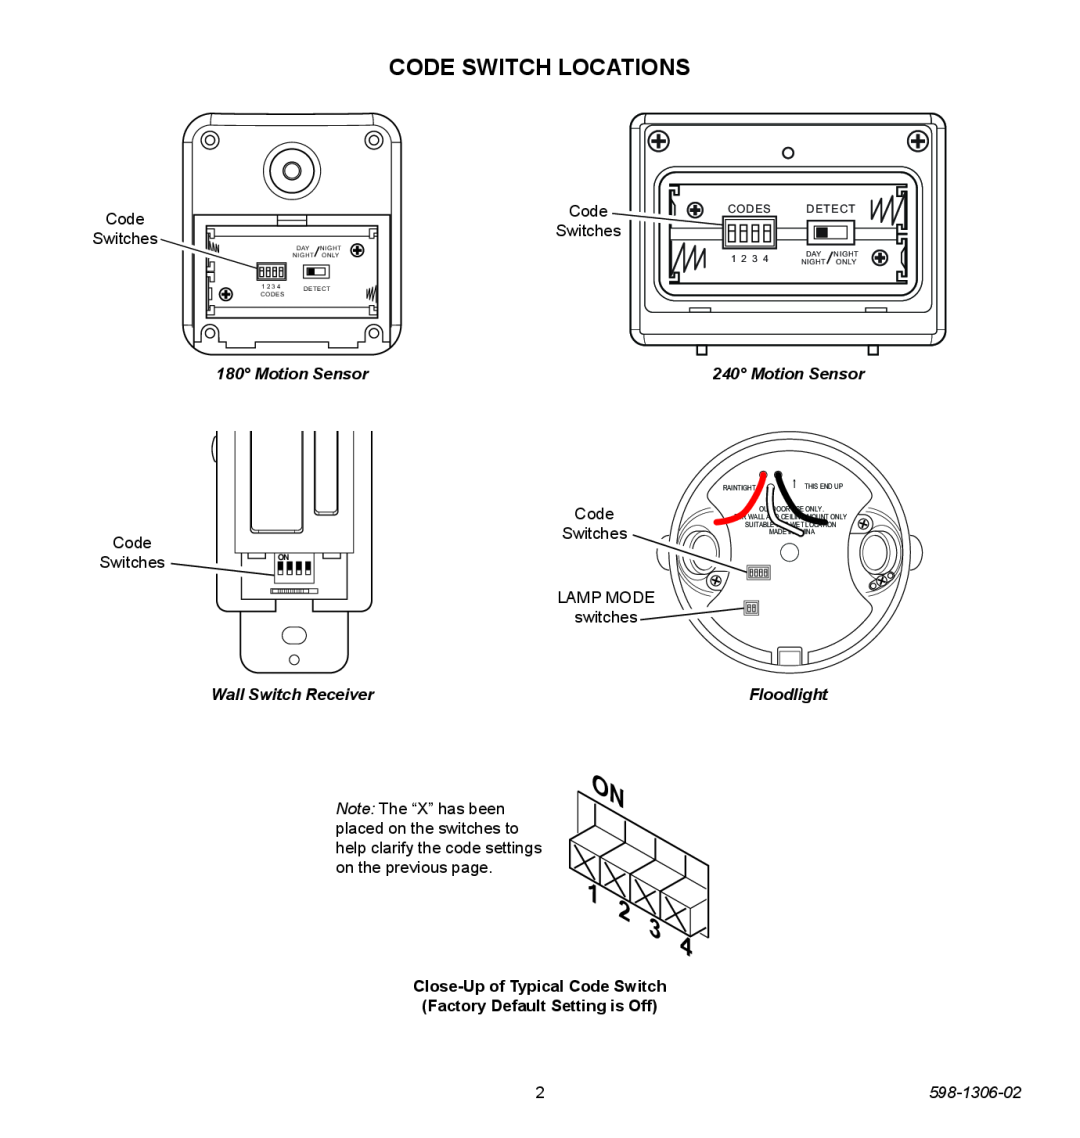 Heath Zenith 598-1306-02 Code Switch Locations, Motion Sensor, Wall Switch Receiver, Floodlight, Detect, Codes, 1 2 3 